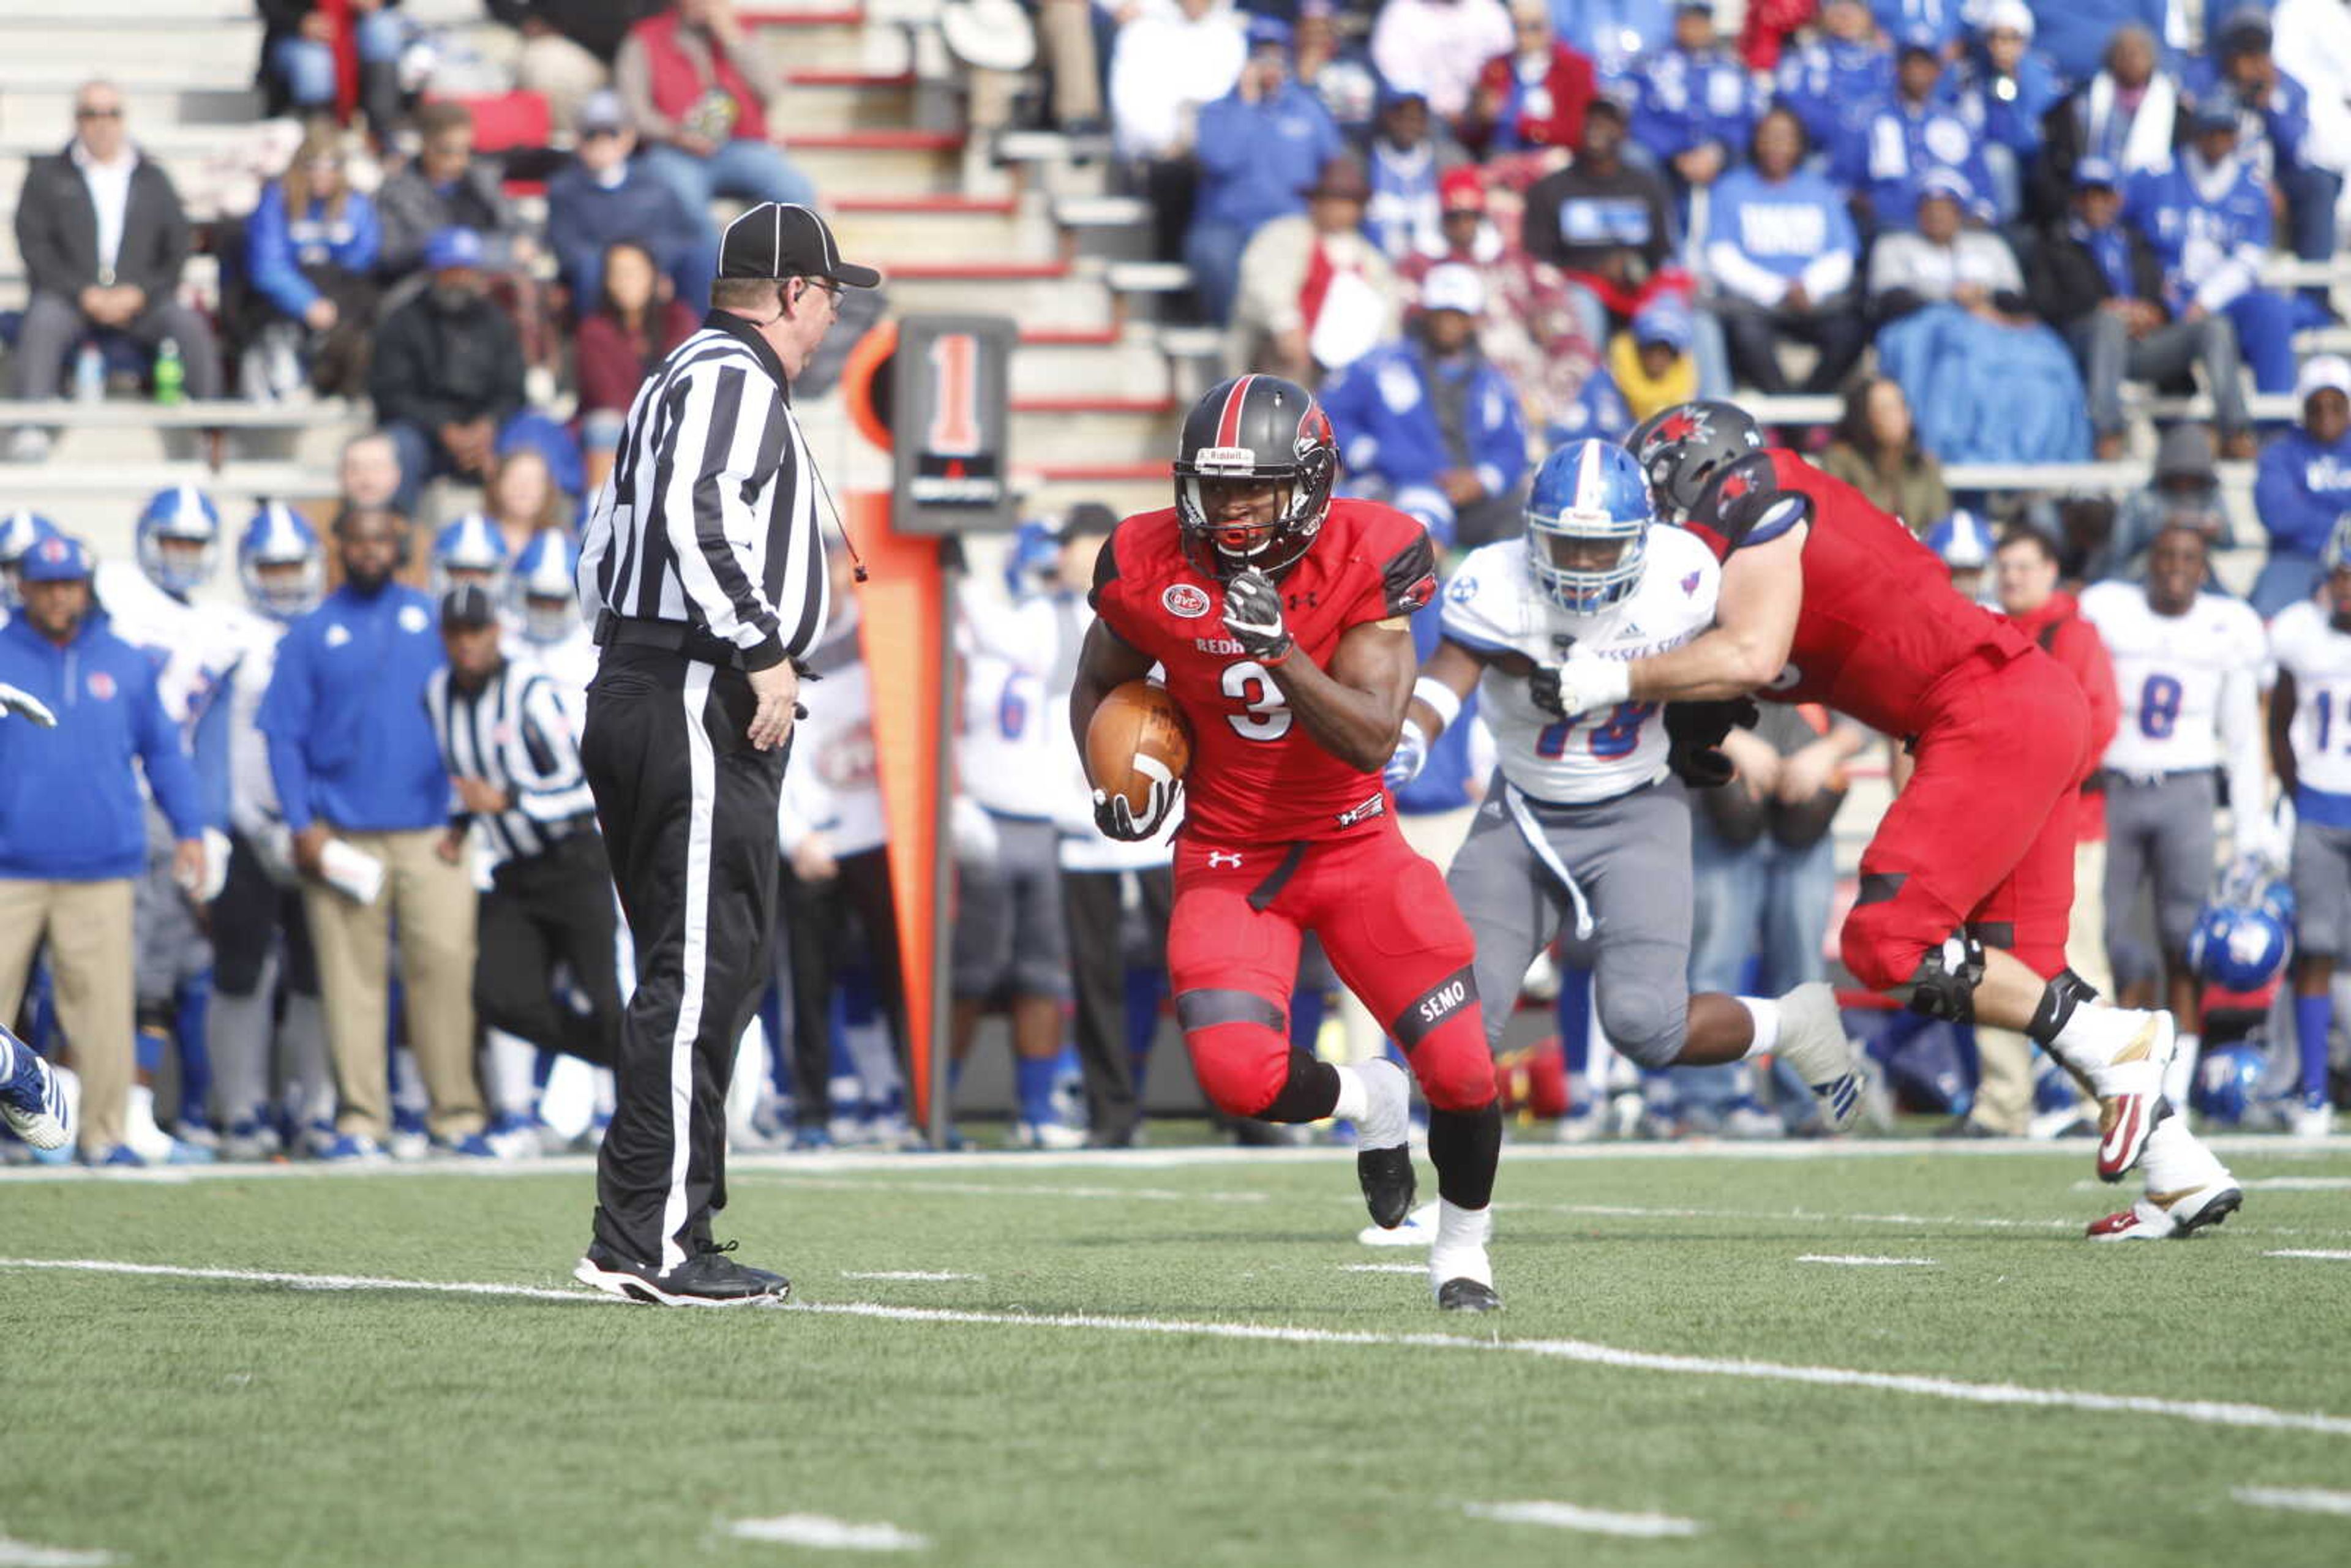 Senior running back Marquis Terry breaks out for 37-yard touchdown run against Tennessee State on Nov. 3.